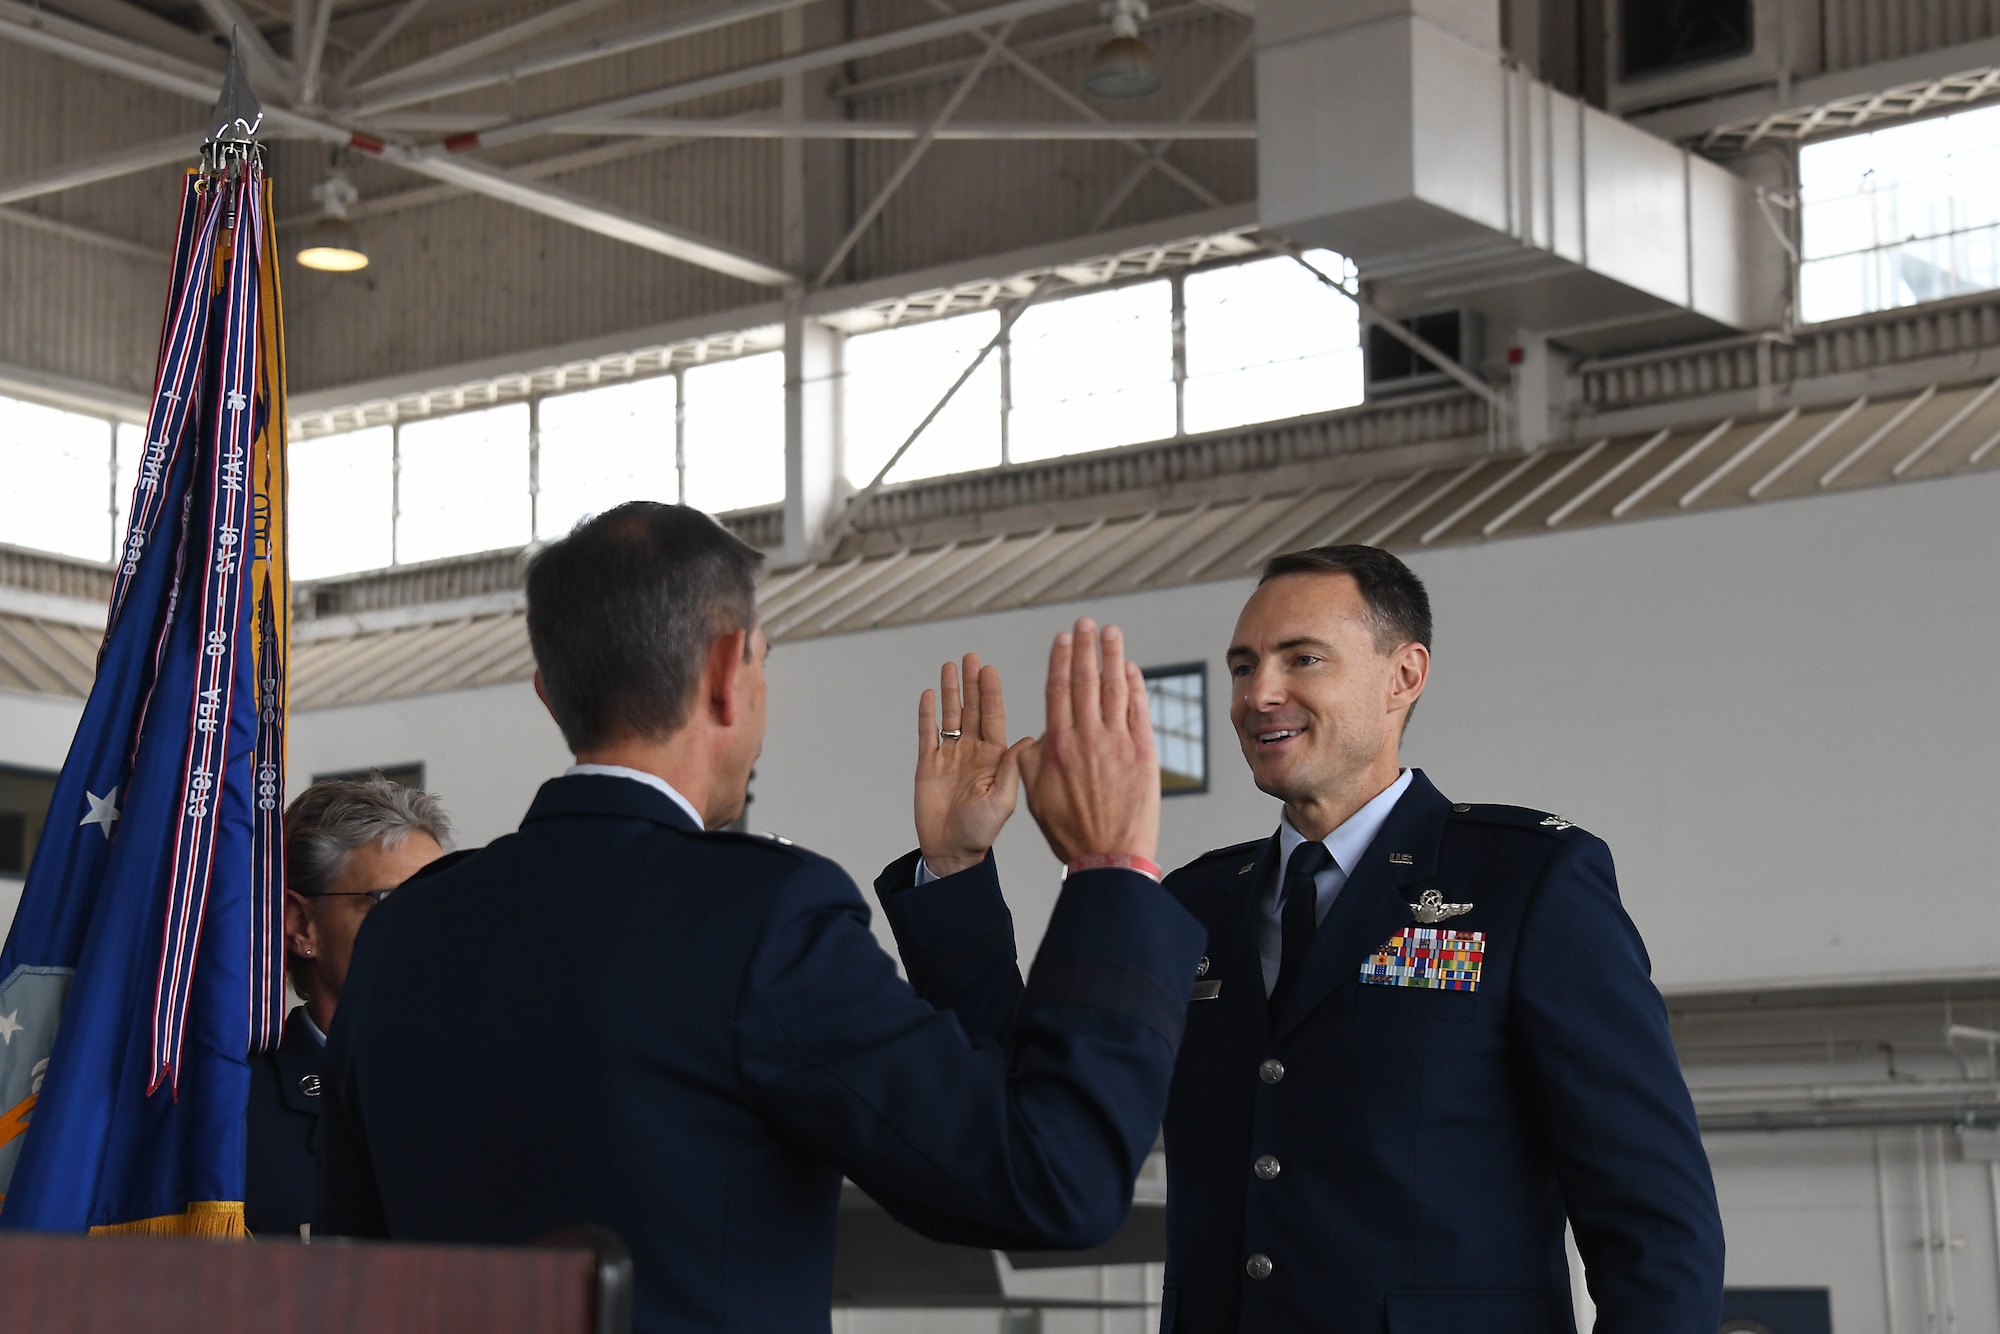 From right, a man in an Air Force service dress uniform (blue suit) holds up his right hand to swear in to a position. On the left, a man with in a similar blue suit stands with his back to the front of the photo frame.